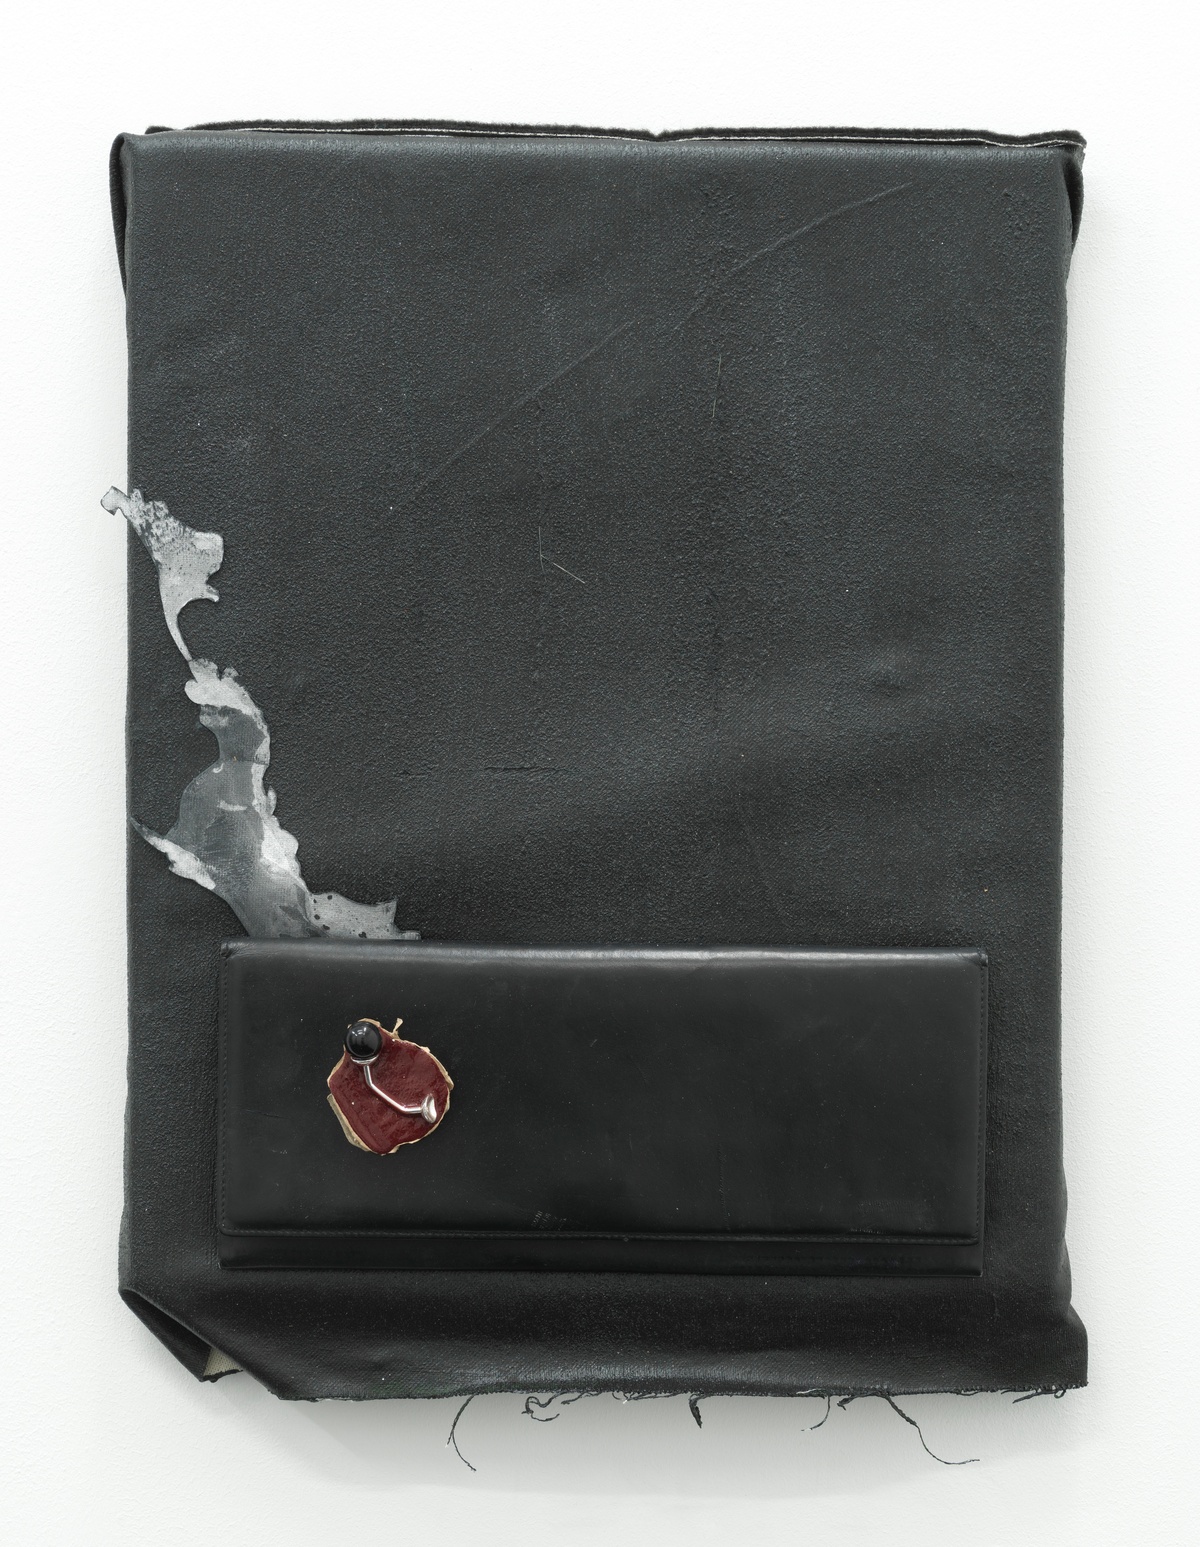 Forge, 2021. acrylic, paper, cardboard, cufflink, synthetic leather, carpet on canvas. 47 x 34 x 3.5 cm